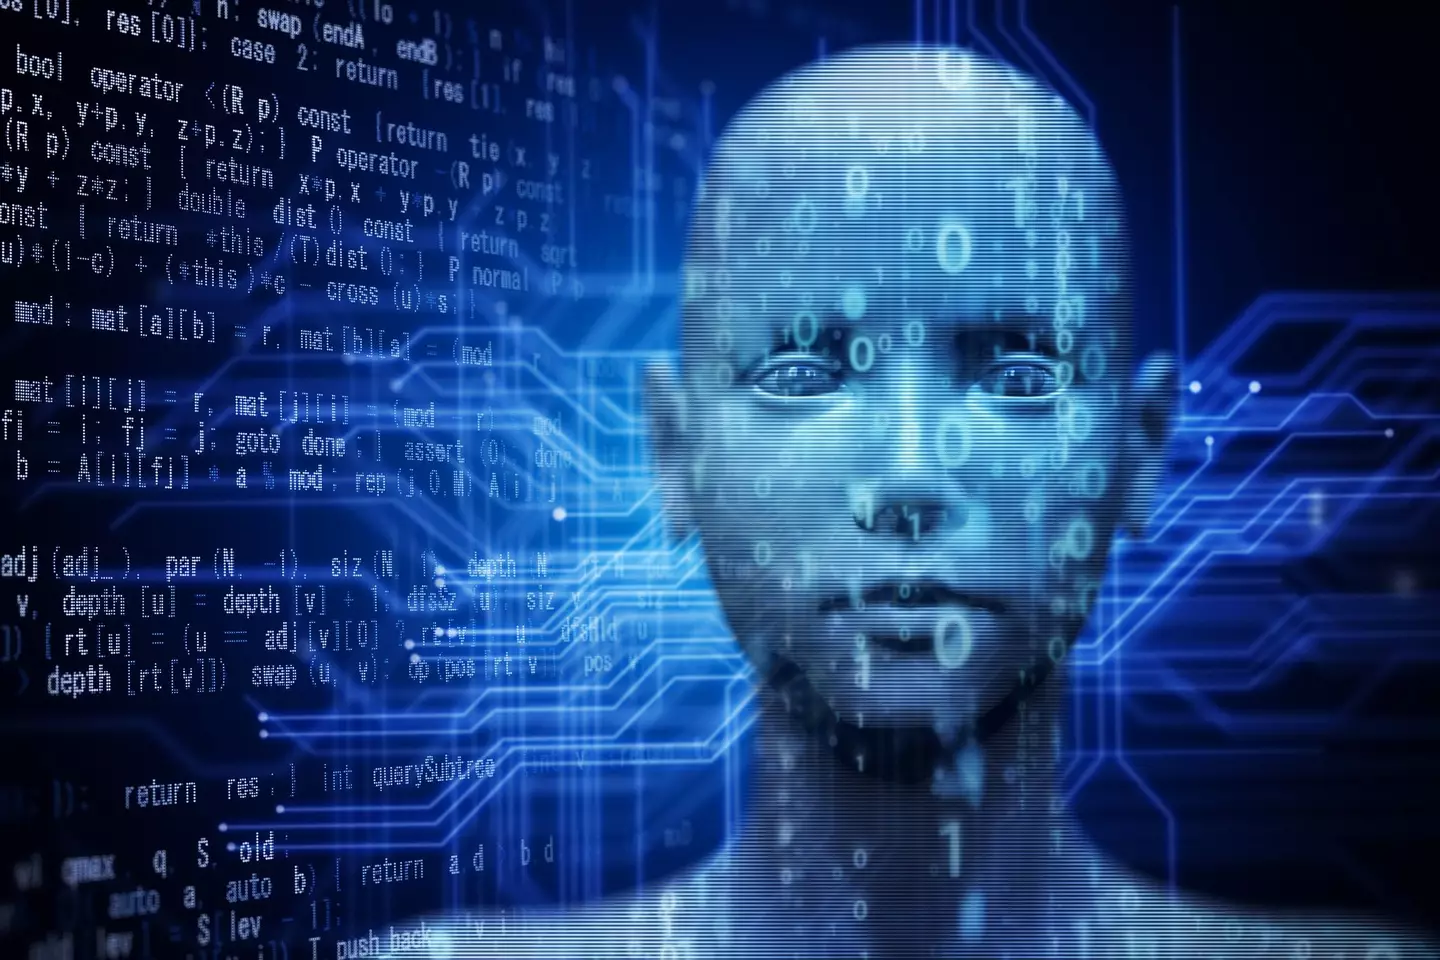 AI could also contribute to the risk, according to Salome. (Getty stock image)